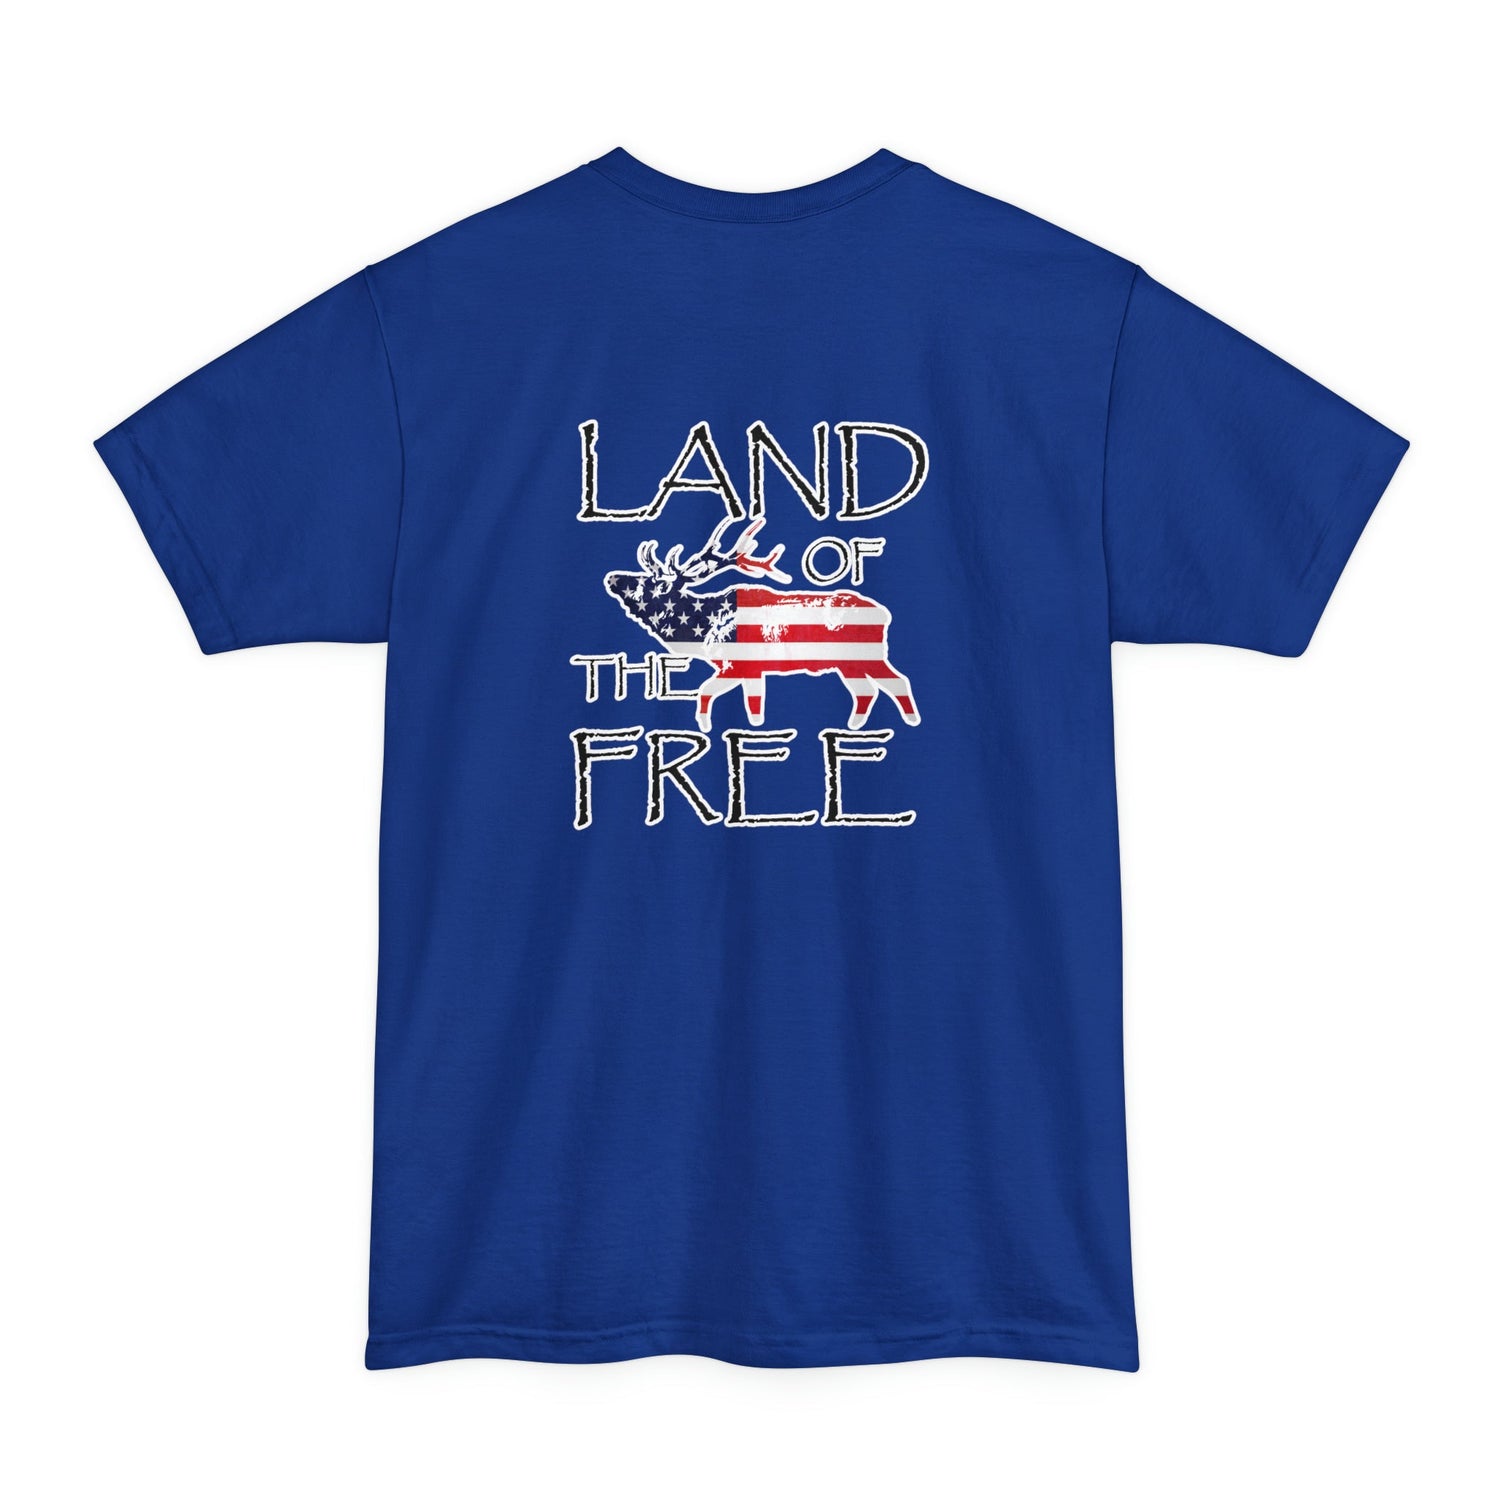 Big and tall patriotic elk hunting t-shirt, color blue, back design placement